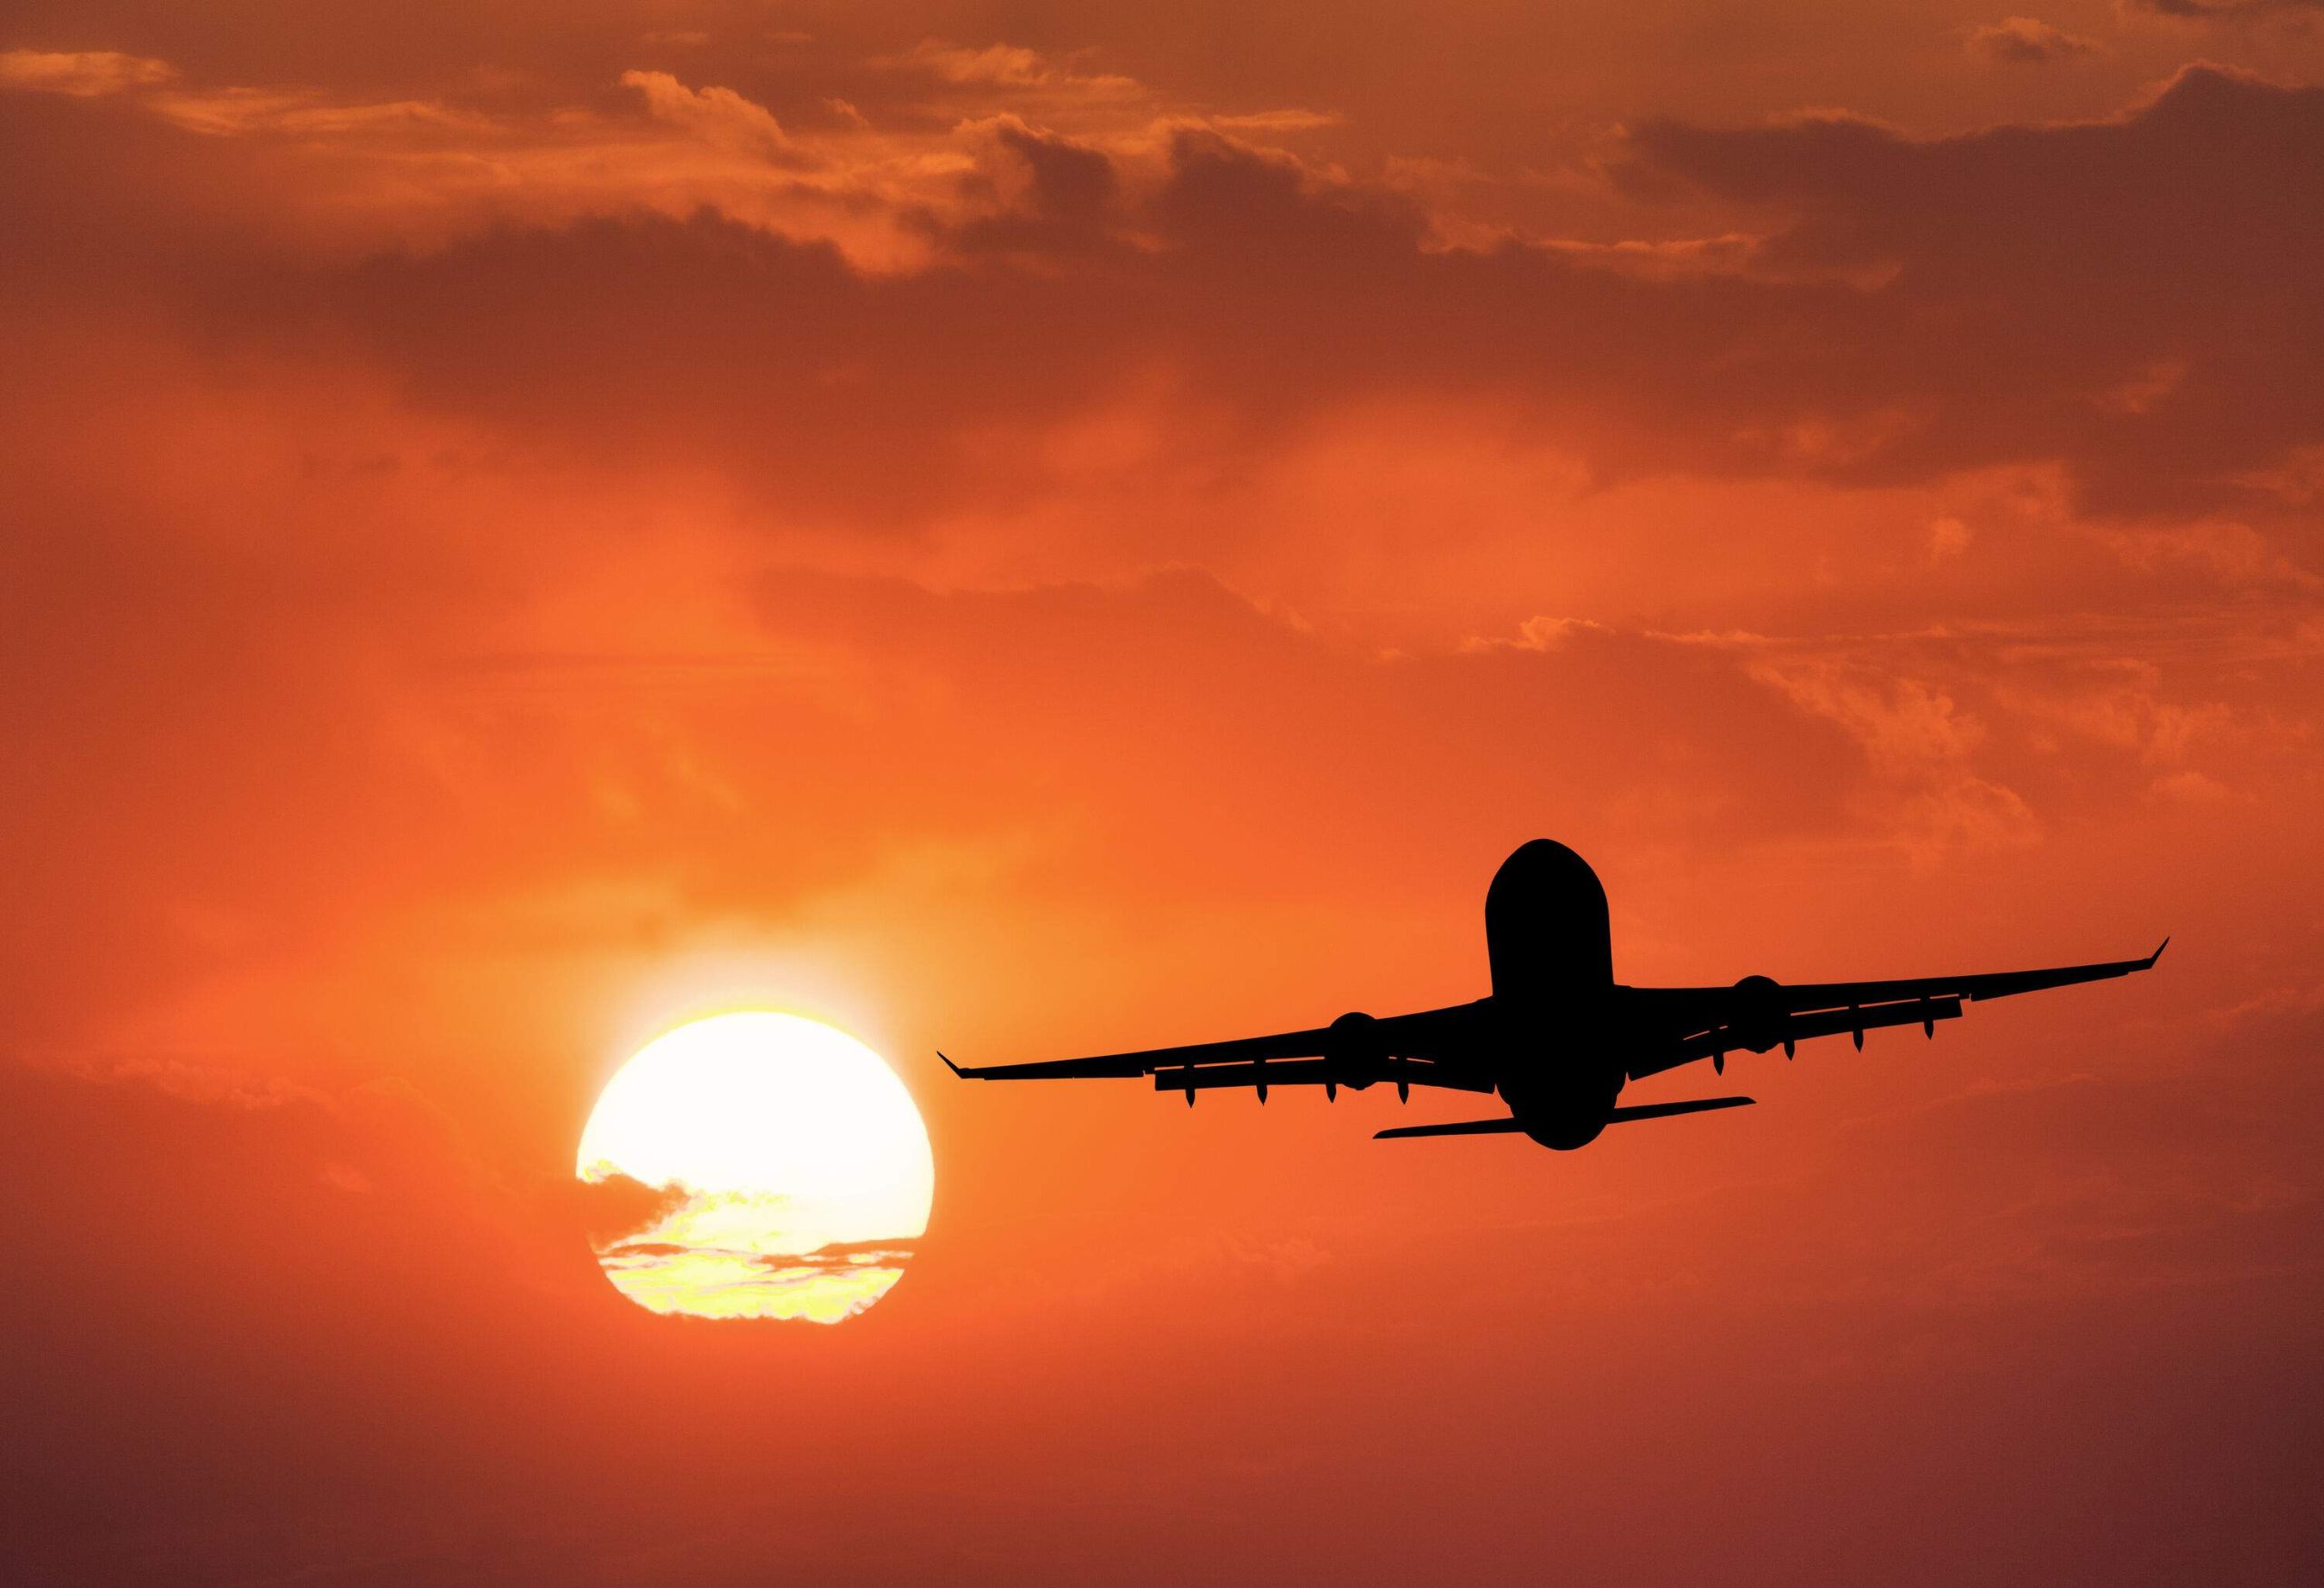 Silhouette of an aircraft against the backdrop of scenic red sunset sky. 